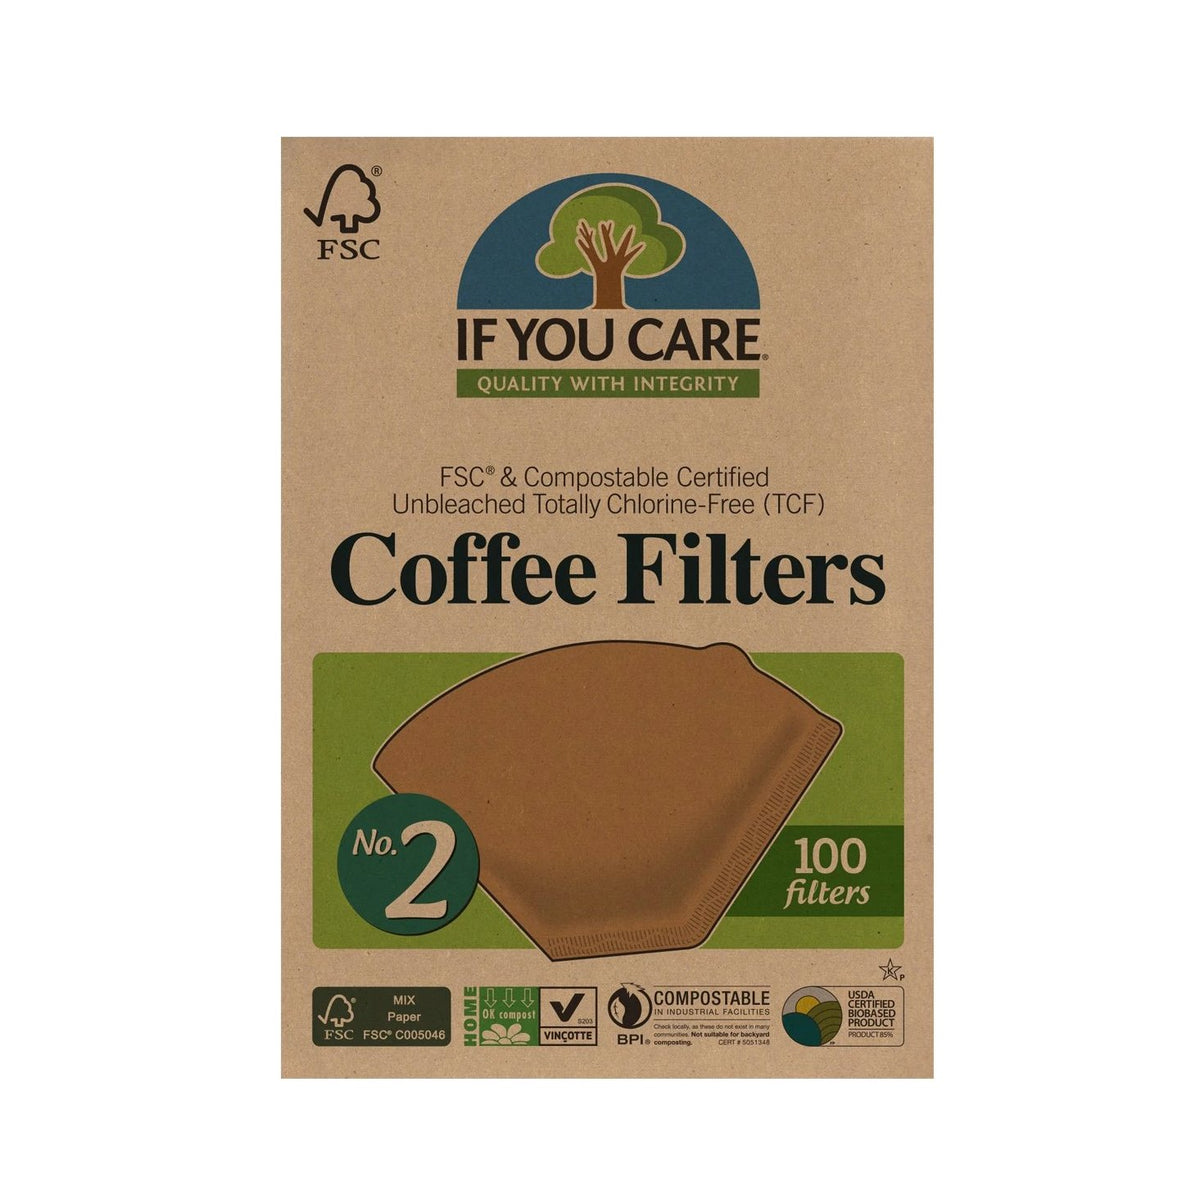 If You Care® FSC® &amp; Compostable Certified. Unbleached. Totally Chlorine-Free (TCF). No. 2 coffee filters in package. 100 filters per package